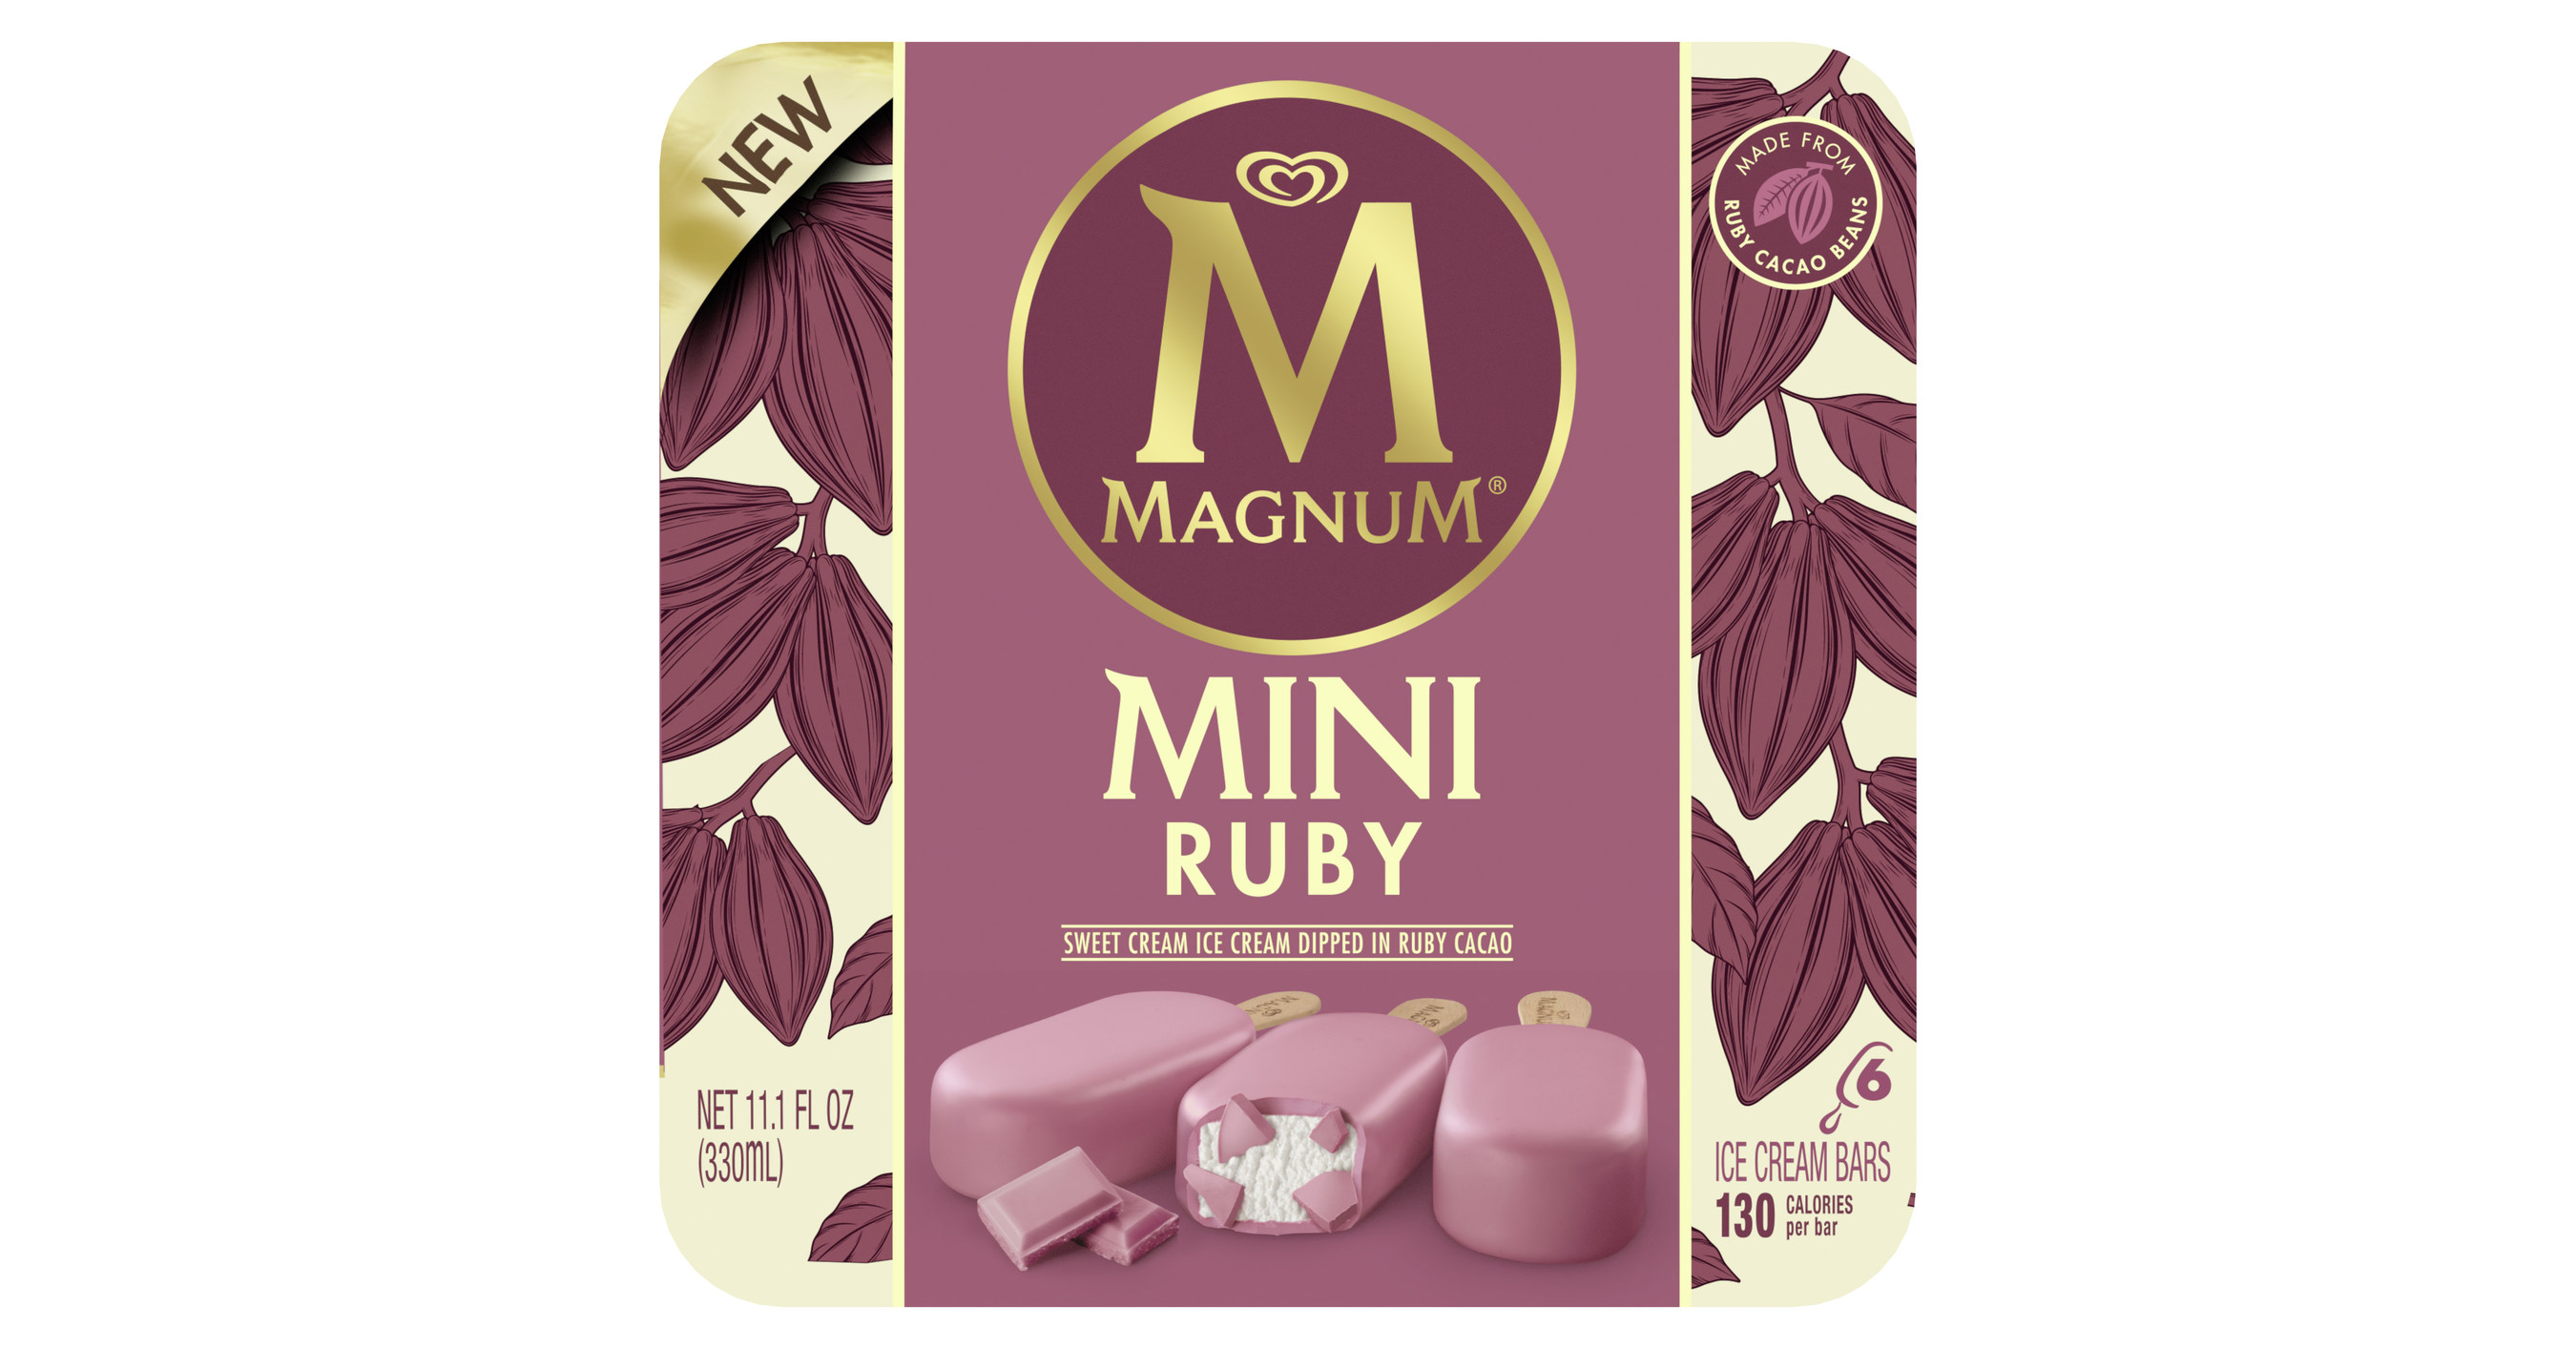 Magnum Becomes The First National Ice Cream Brand In The U.S. To Launch An Ice  Cream Featuring Ruby, A New Variant Of Chocolate